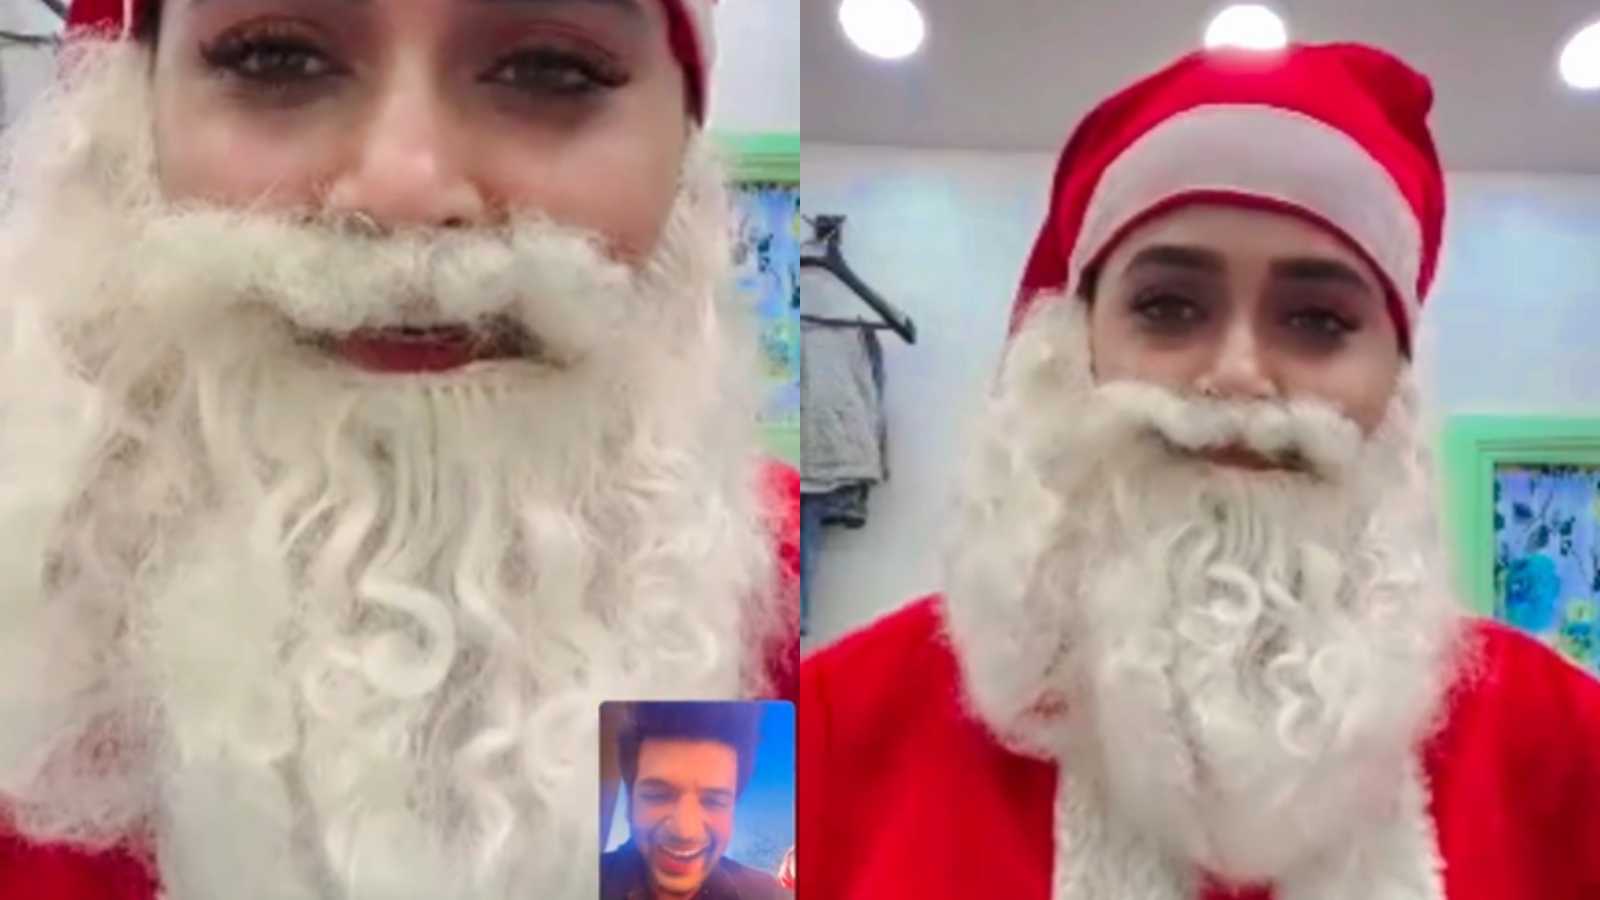 Tejasswi Prakash makes Karan Kundrra smile dressed as Santa Claus, her adorable dancing is the best thing you'll see on Christmas